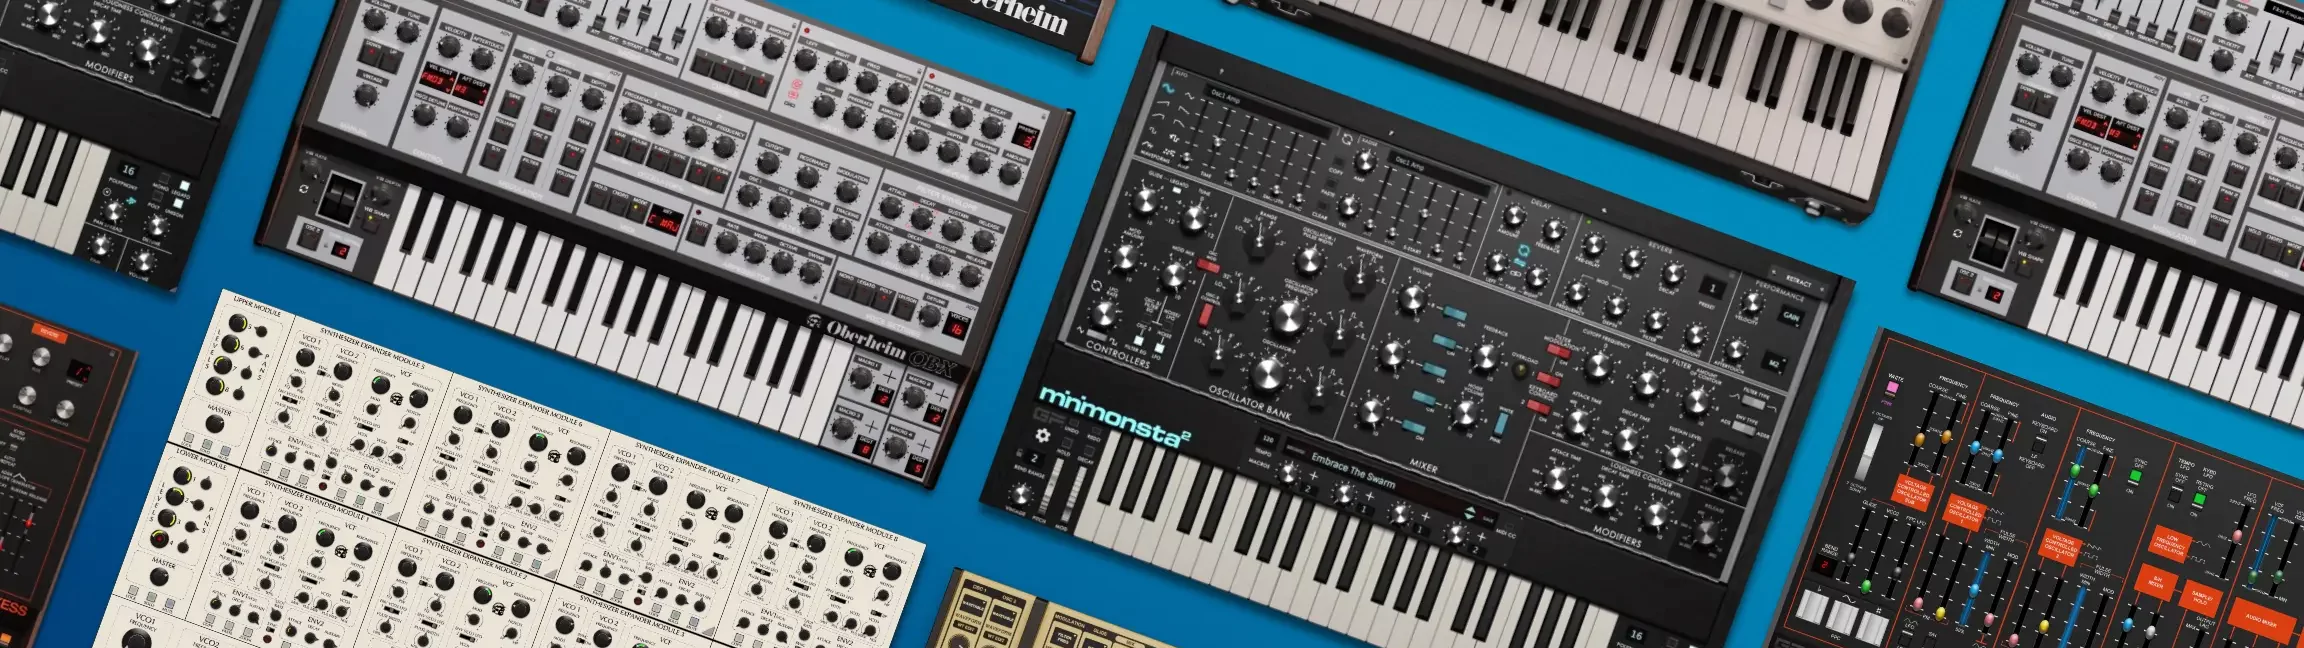 GForce Heritage synth collection